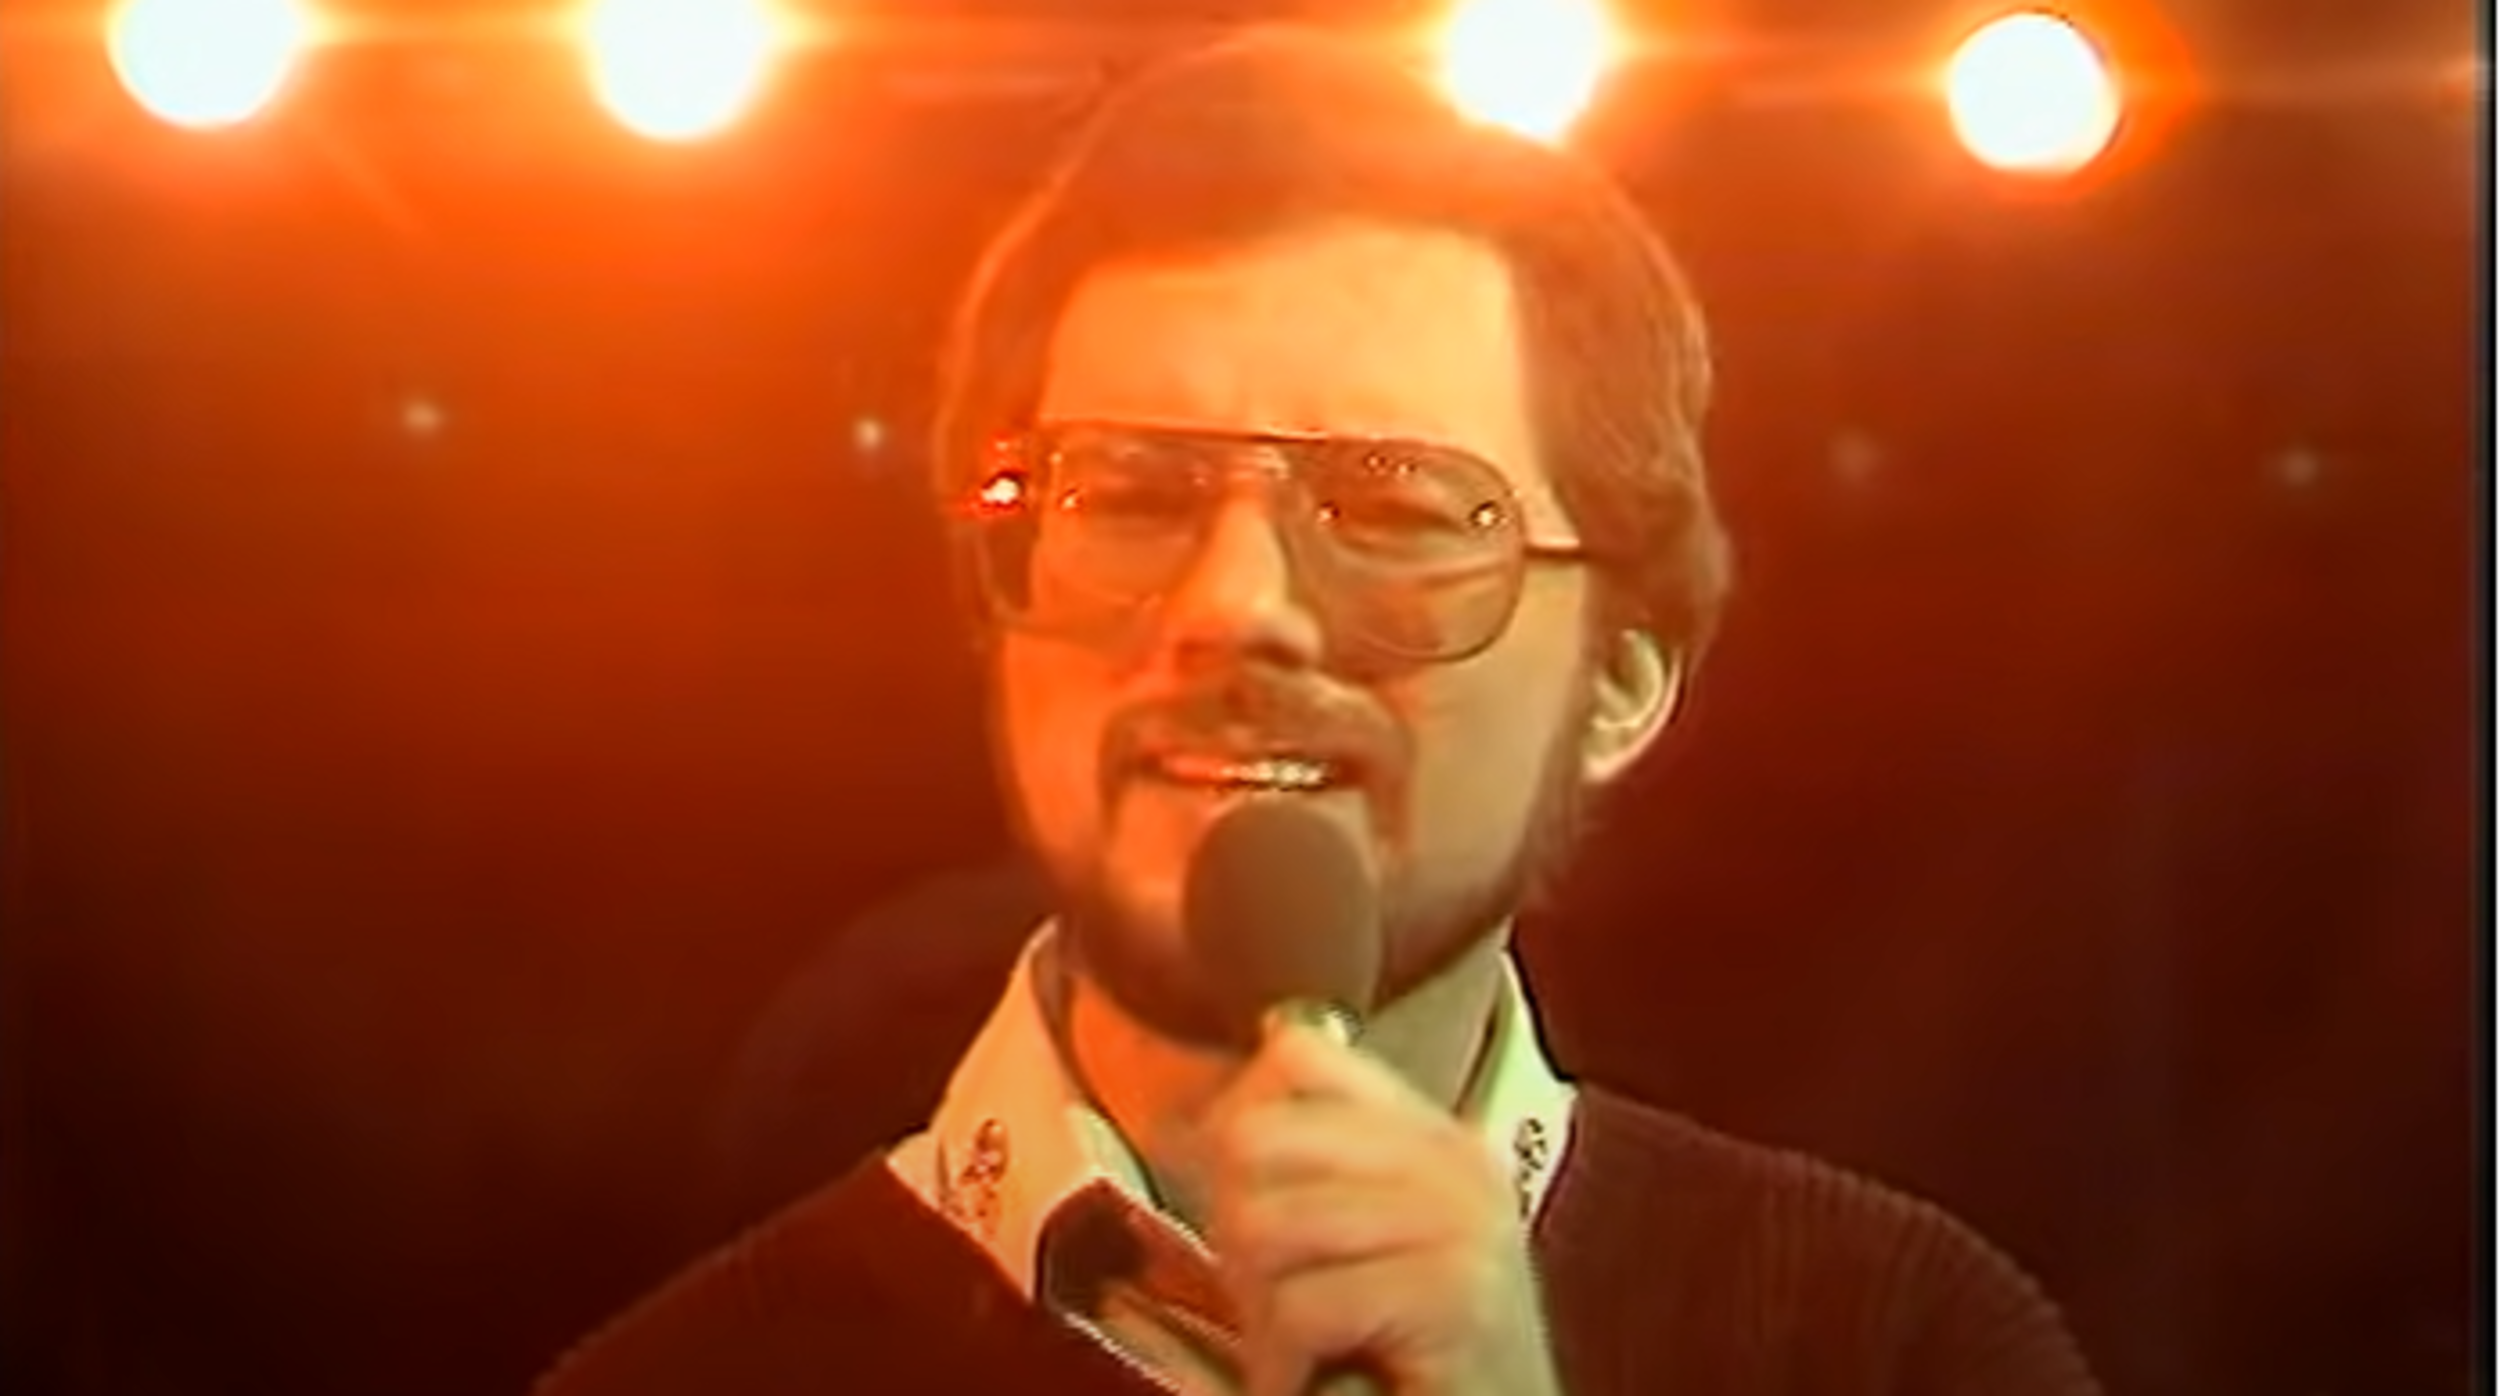 <p>This No.1 <em>Billboard</em> Hot 100 hit for England's Rupert Holmes has achieved a steady cult following over the years. Perhaps, because of the unique title and conjured images of some warm, beach-laden paradise. Yacht rock's association with summer, water, and care-free living, as a backdrop to a romantic story, is one of its appealing aspects. This <a href="https://www.youtube.com/watch?v=zROIlspgOjM">song is about a couple who ultimately patch up a rough relationship through personal ads</a>. Any time somebody of a certain age sips one of these drinks, ideally at some Caribbean resort with the warm winds off the ocean blowing, "The Pina Colada Song" should come to mind.</p><p>You may also like: <a href='https://www.yardbarker.com/entertainment/articles/25_worst_personal_creative_decisions_in_hollywood_history_011624/s1__31784891'>25 worst personal creative decisions in Hollywood history</a></p>